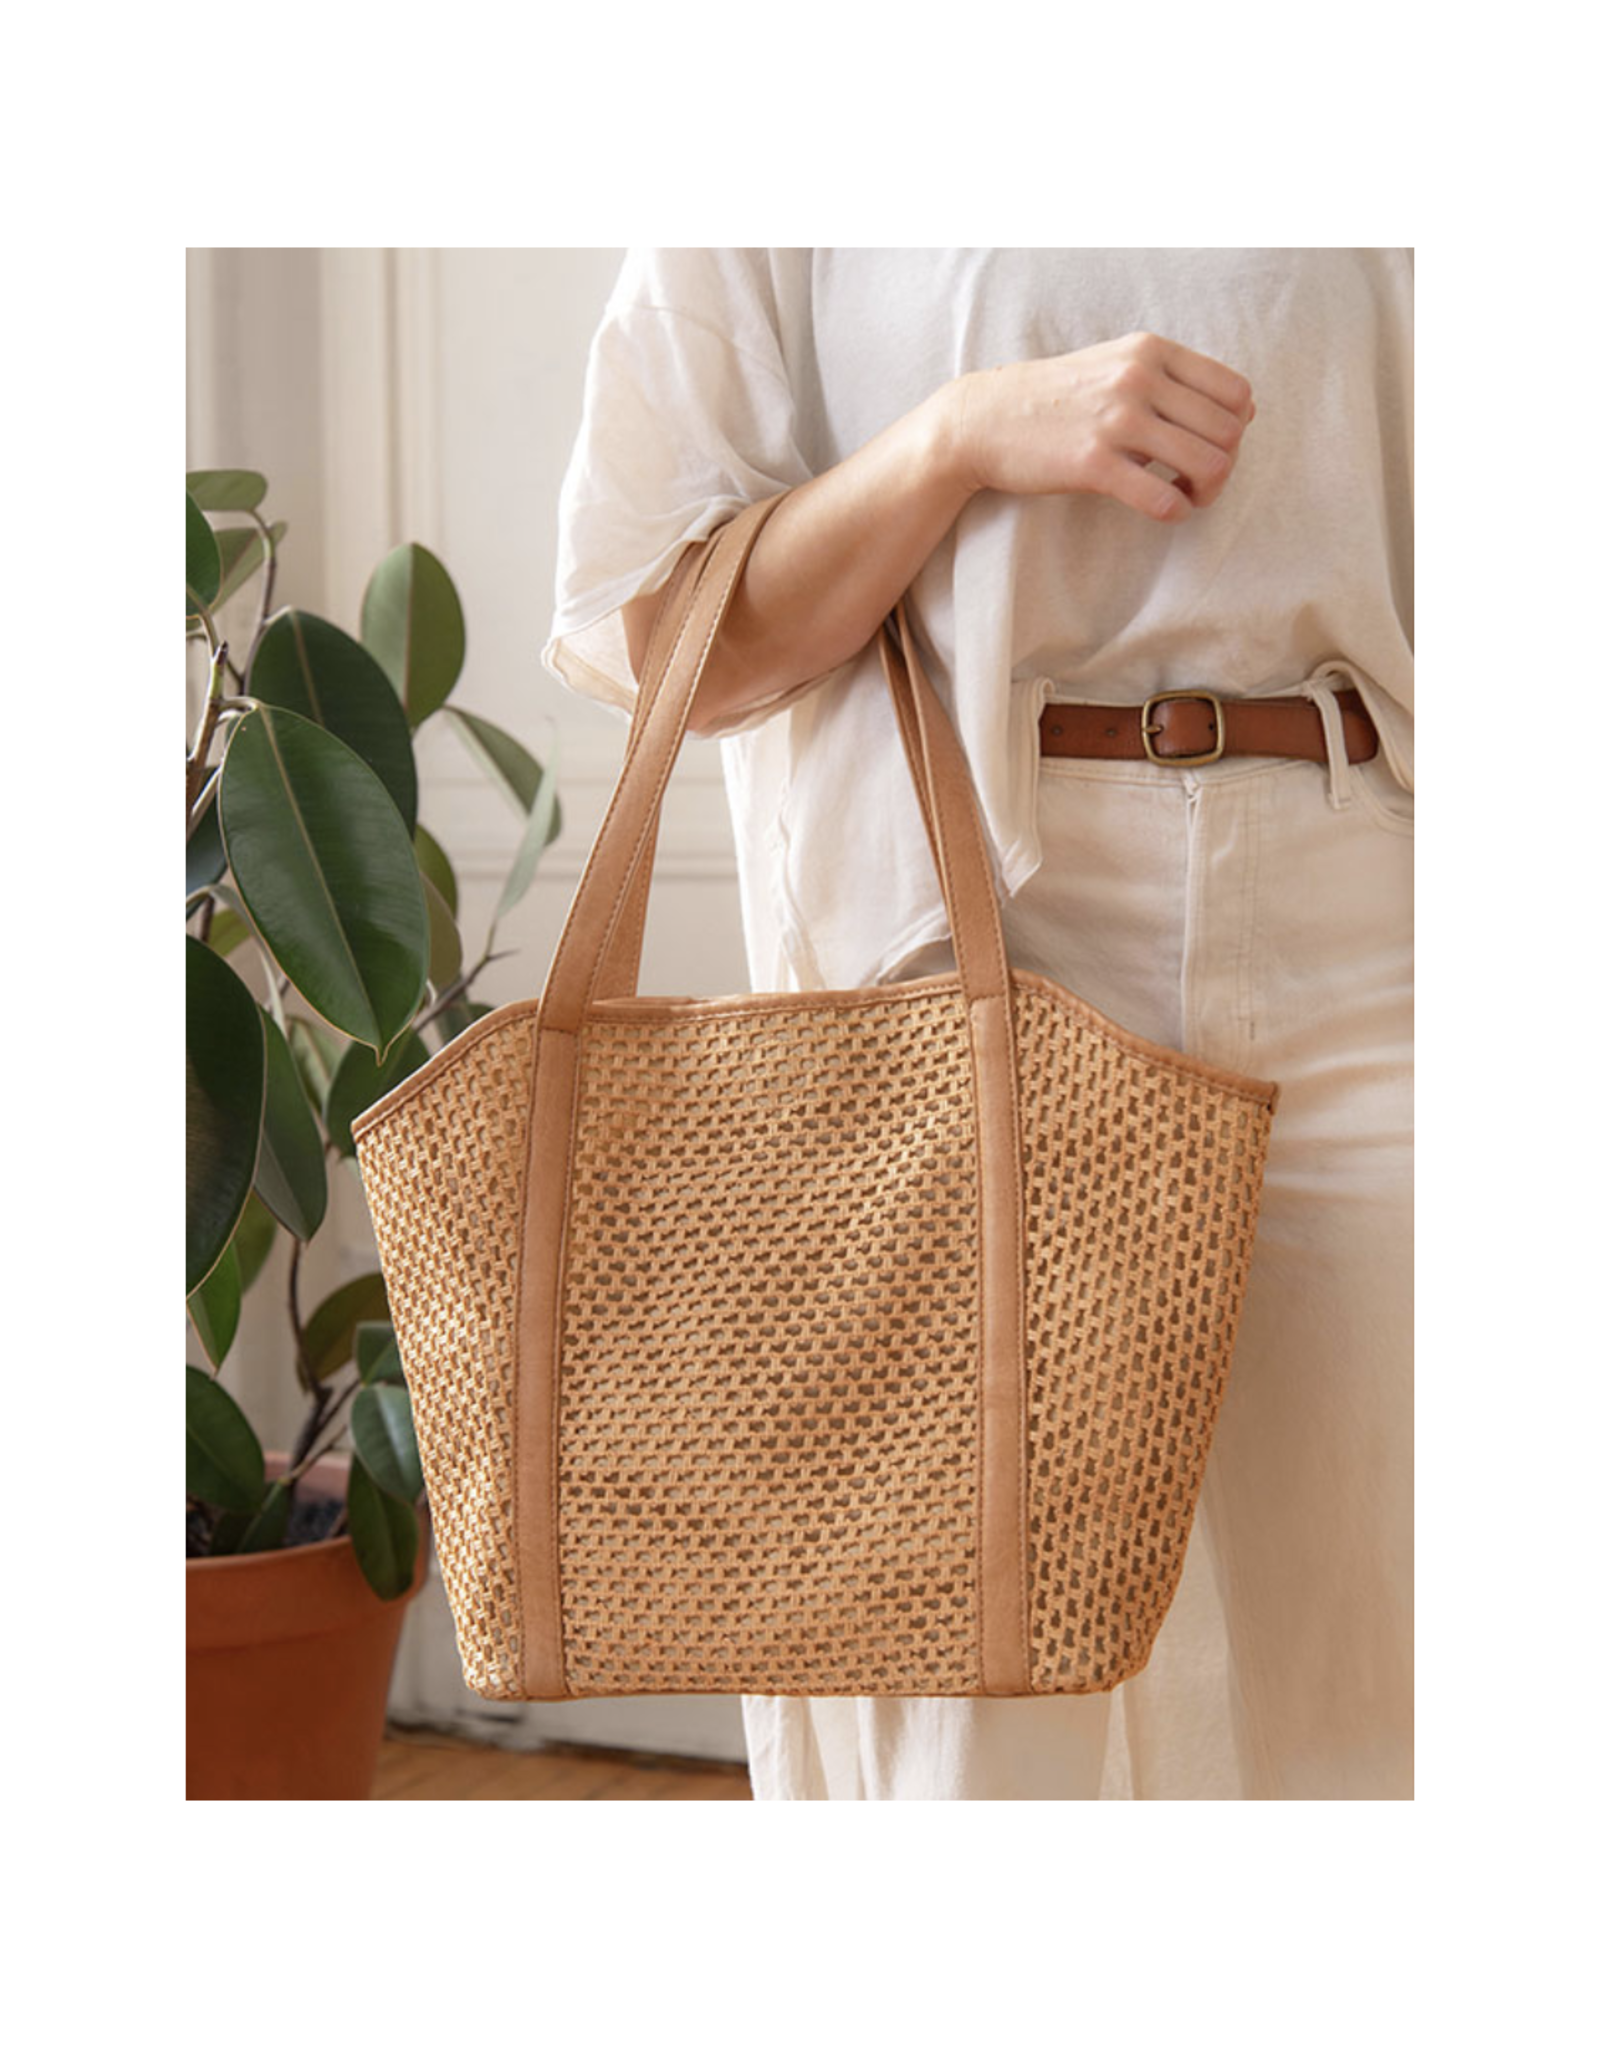 Haven Open Weave Tote - Natural